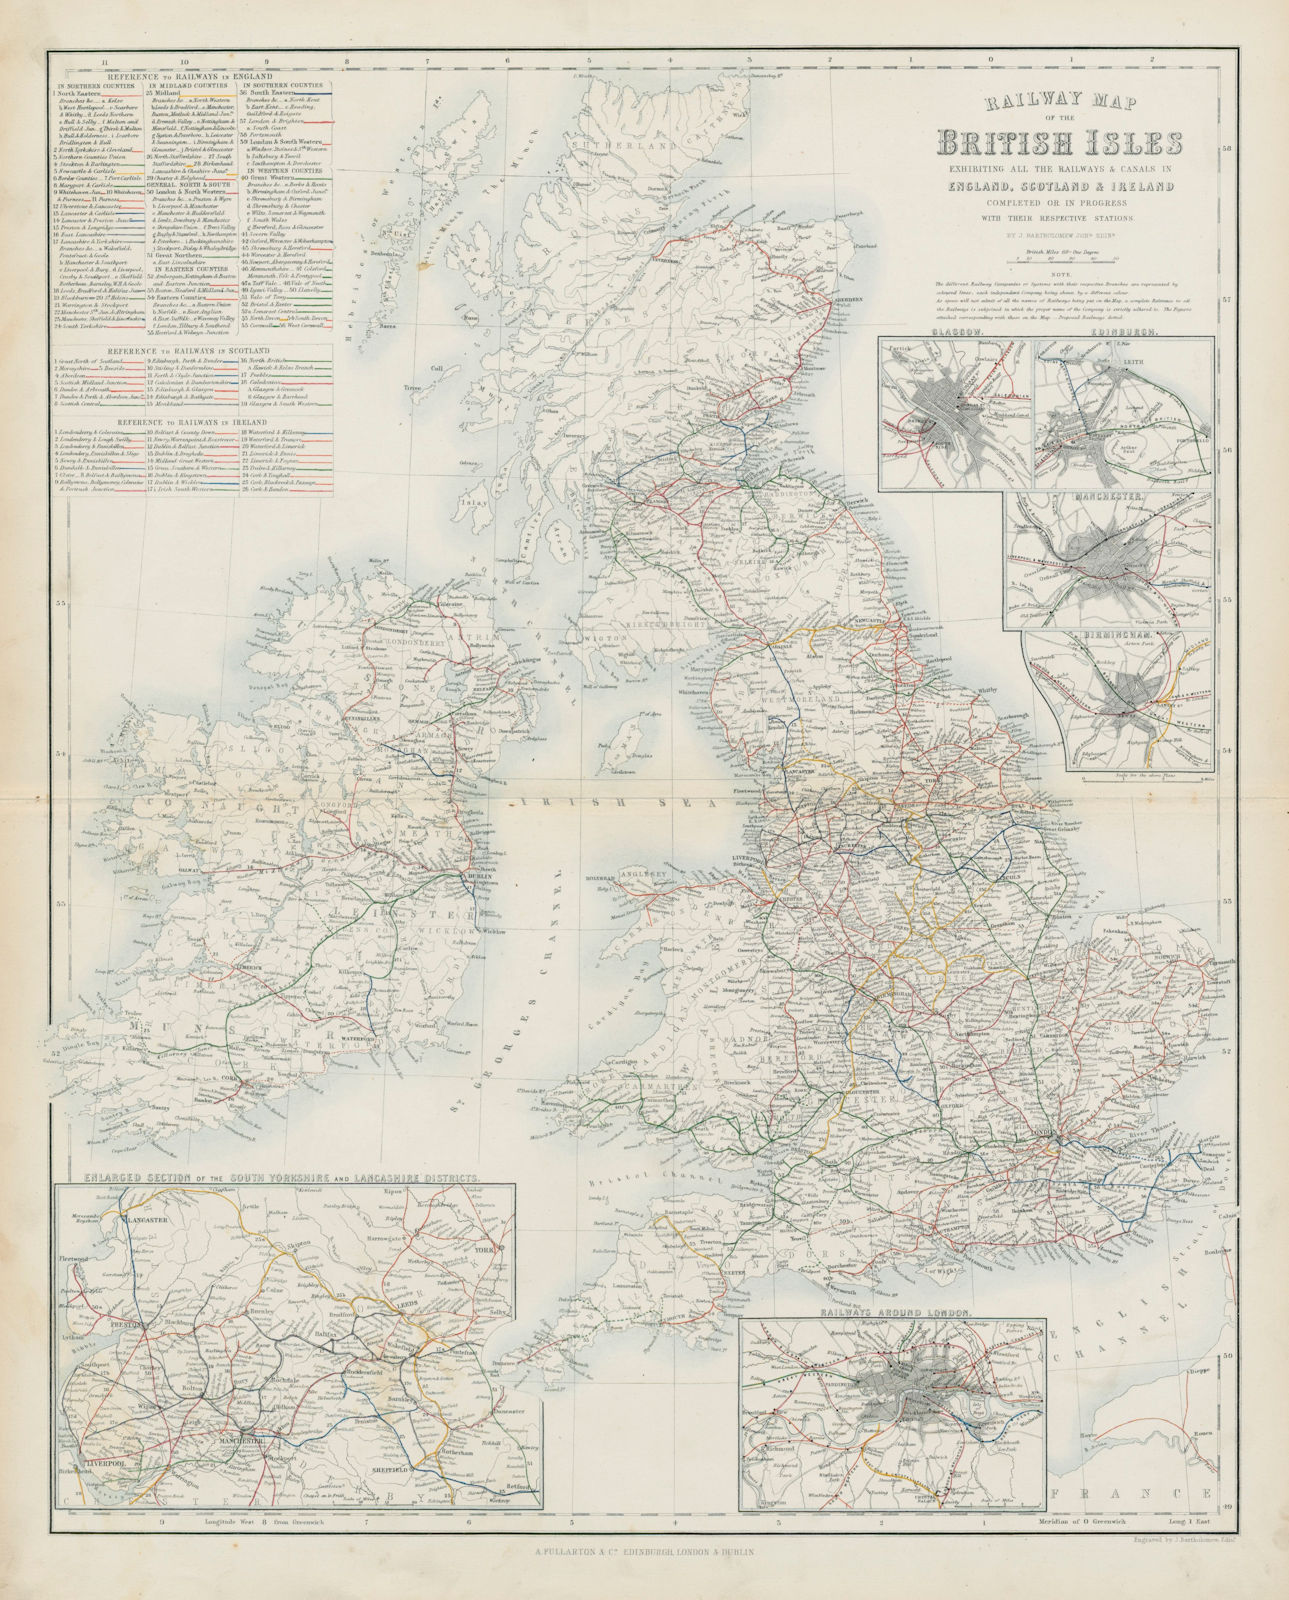 Associate Product Railway Map of the British Isles. SWANSTON 1860 old antique plan chart